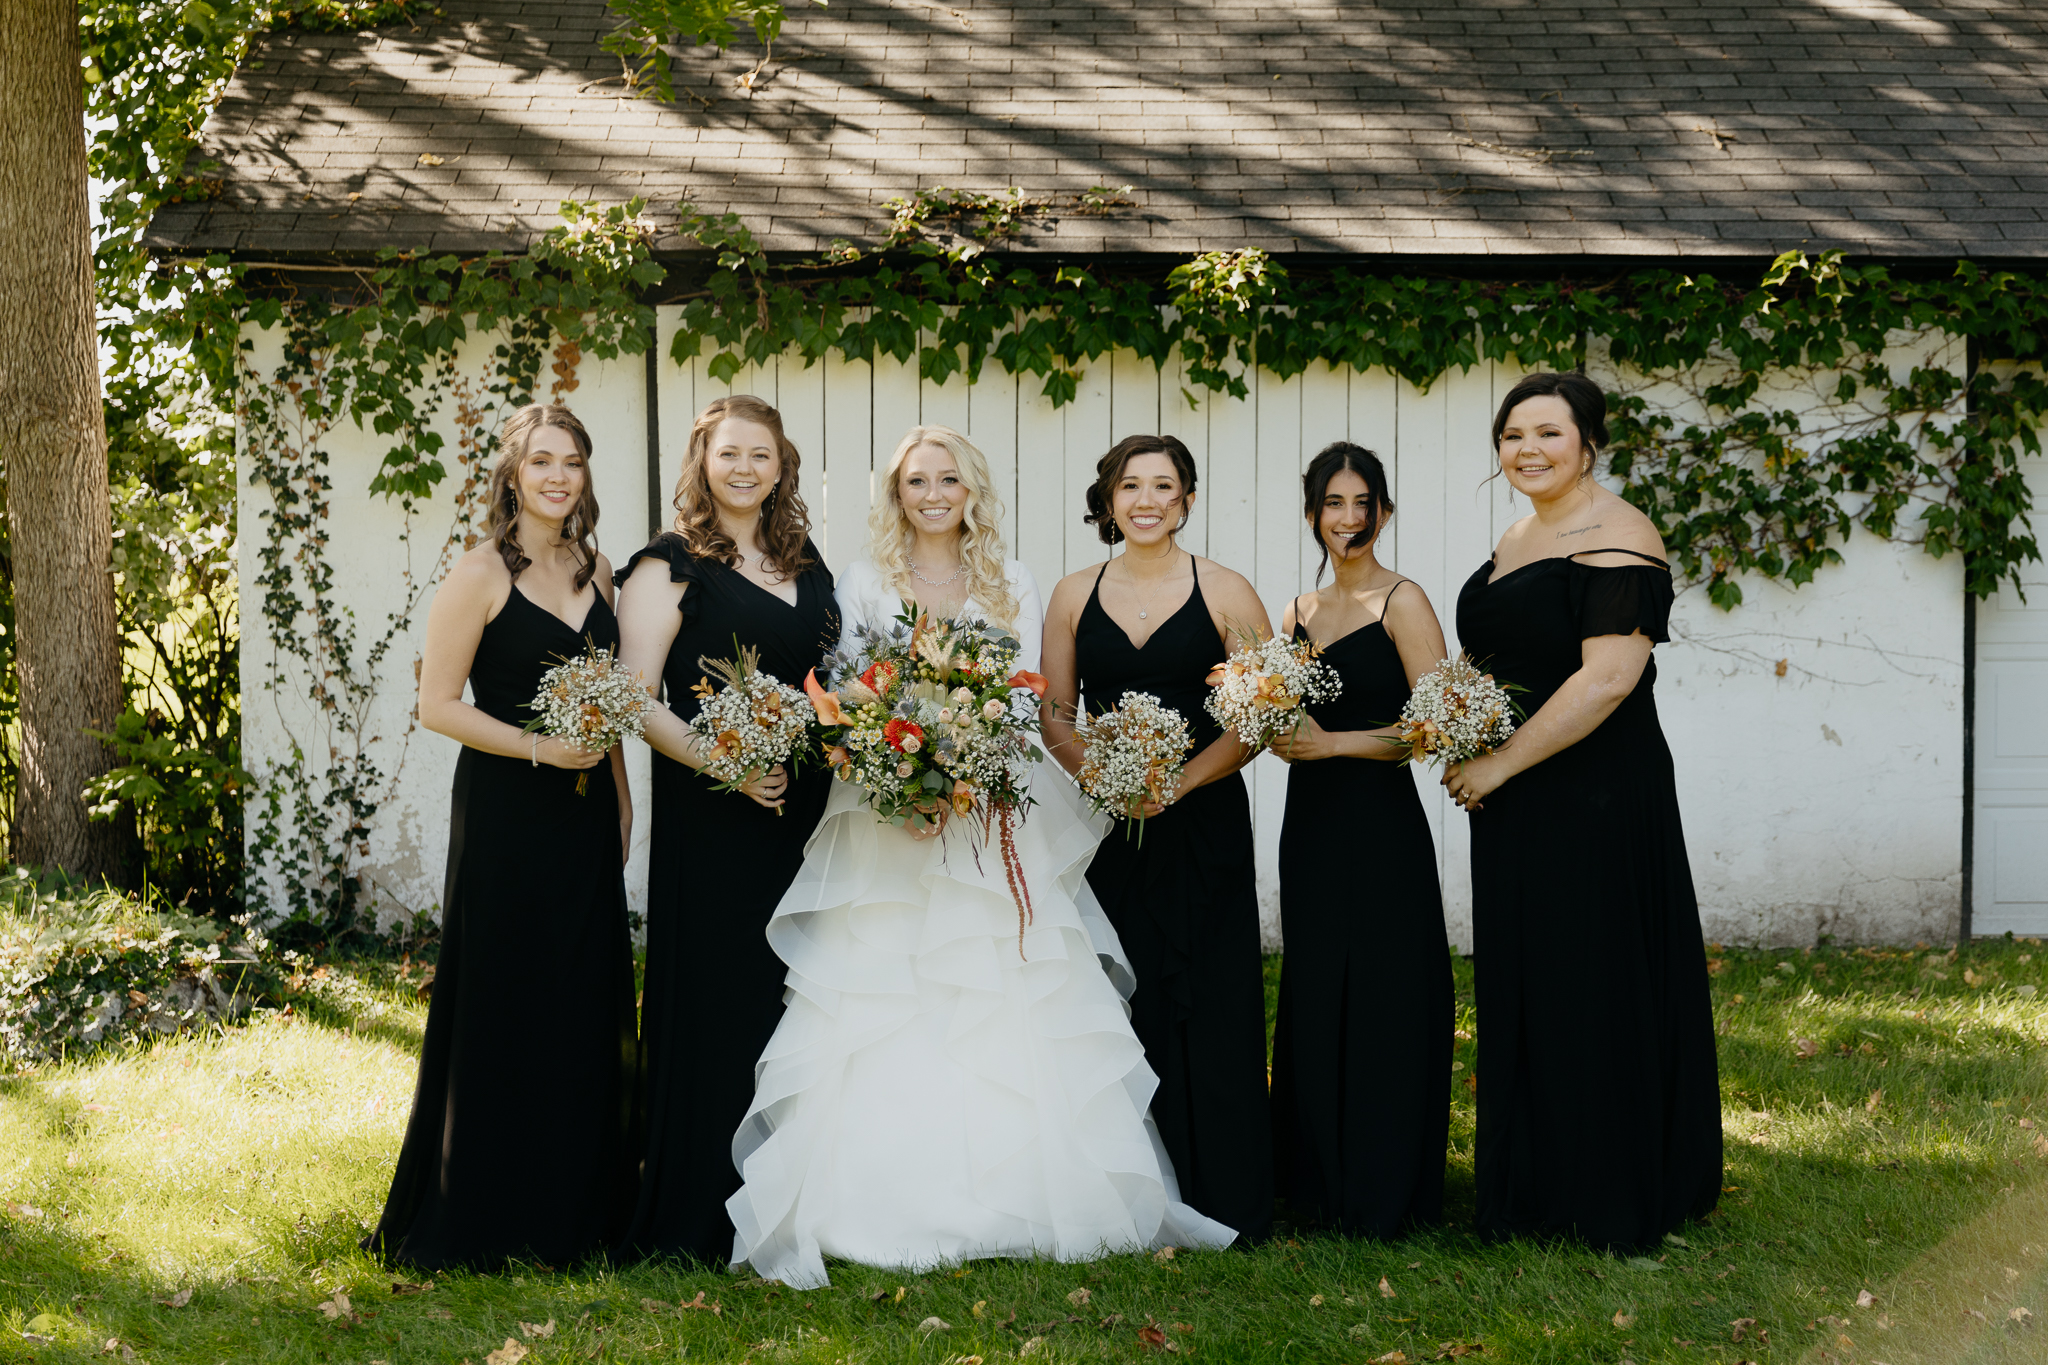 Bridesmaids and bride smile together with bouquets, standing in front of an ivy covered white barn.